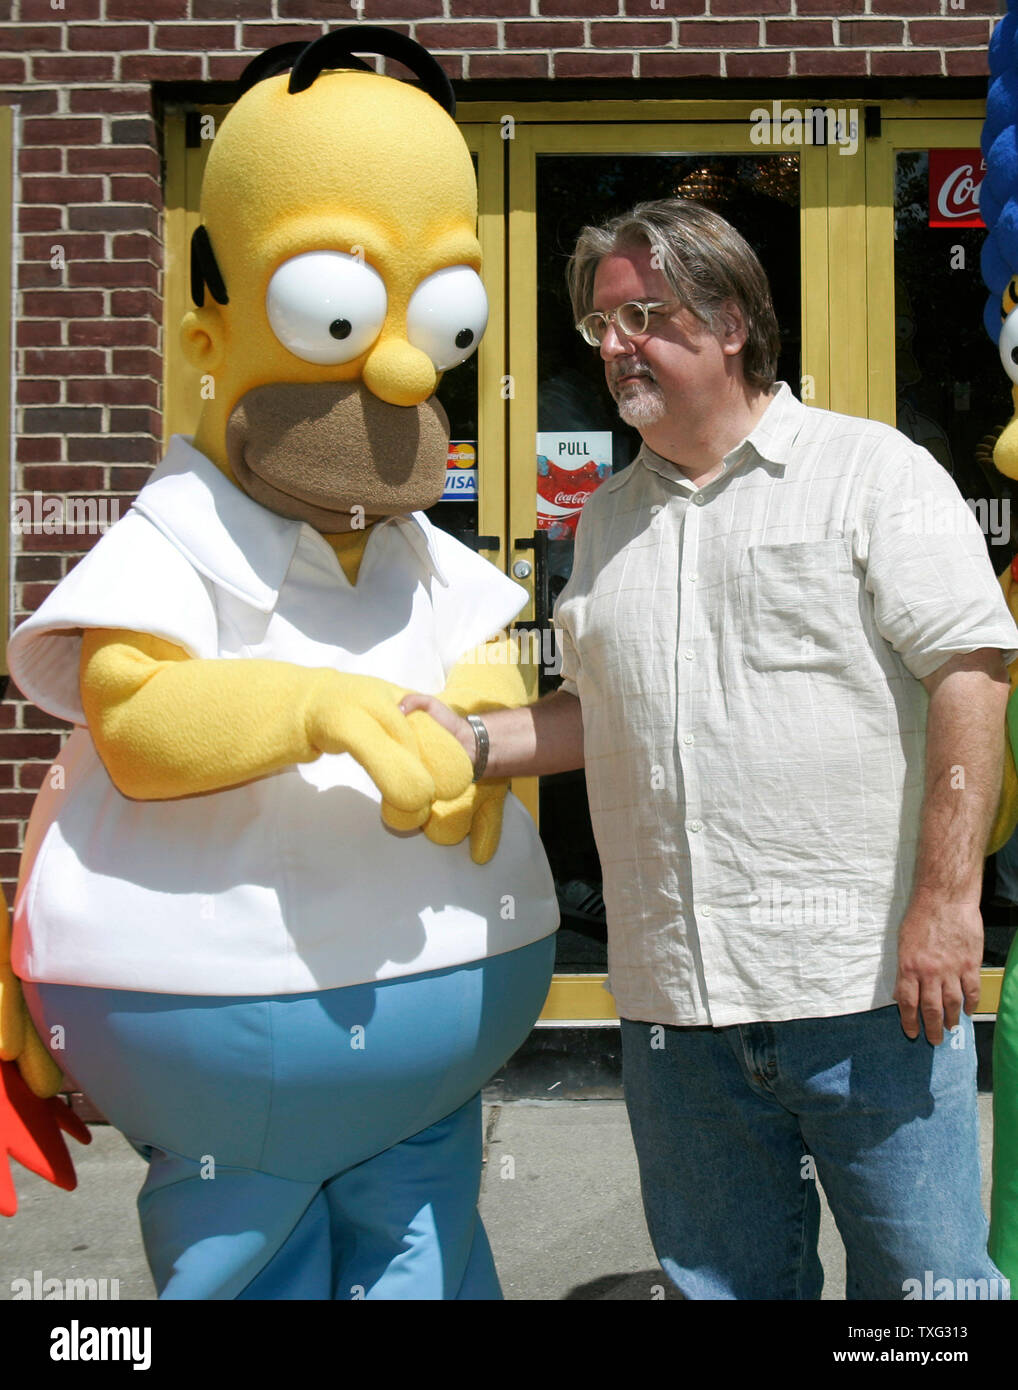 'The Simpsons Movie' producer Matt Groening (R) shakes hands with Homer Simpson at the hometown premier of The Simpsons Movie at the Springfield Movie Theater in Springfield, Vermont on July 21, 2007.  (UPI Photo/Matthew Healey) Stock Photo